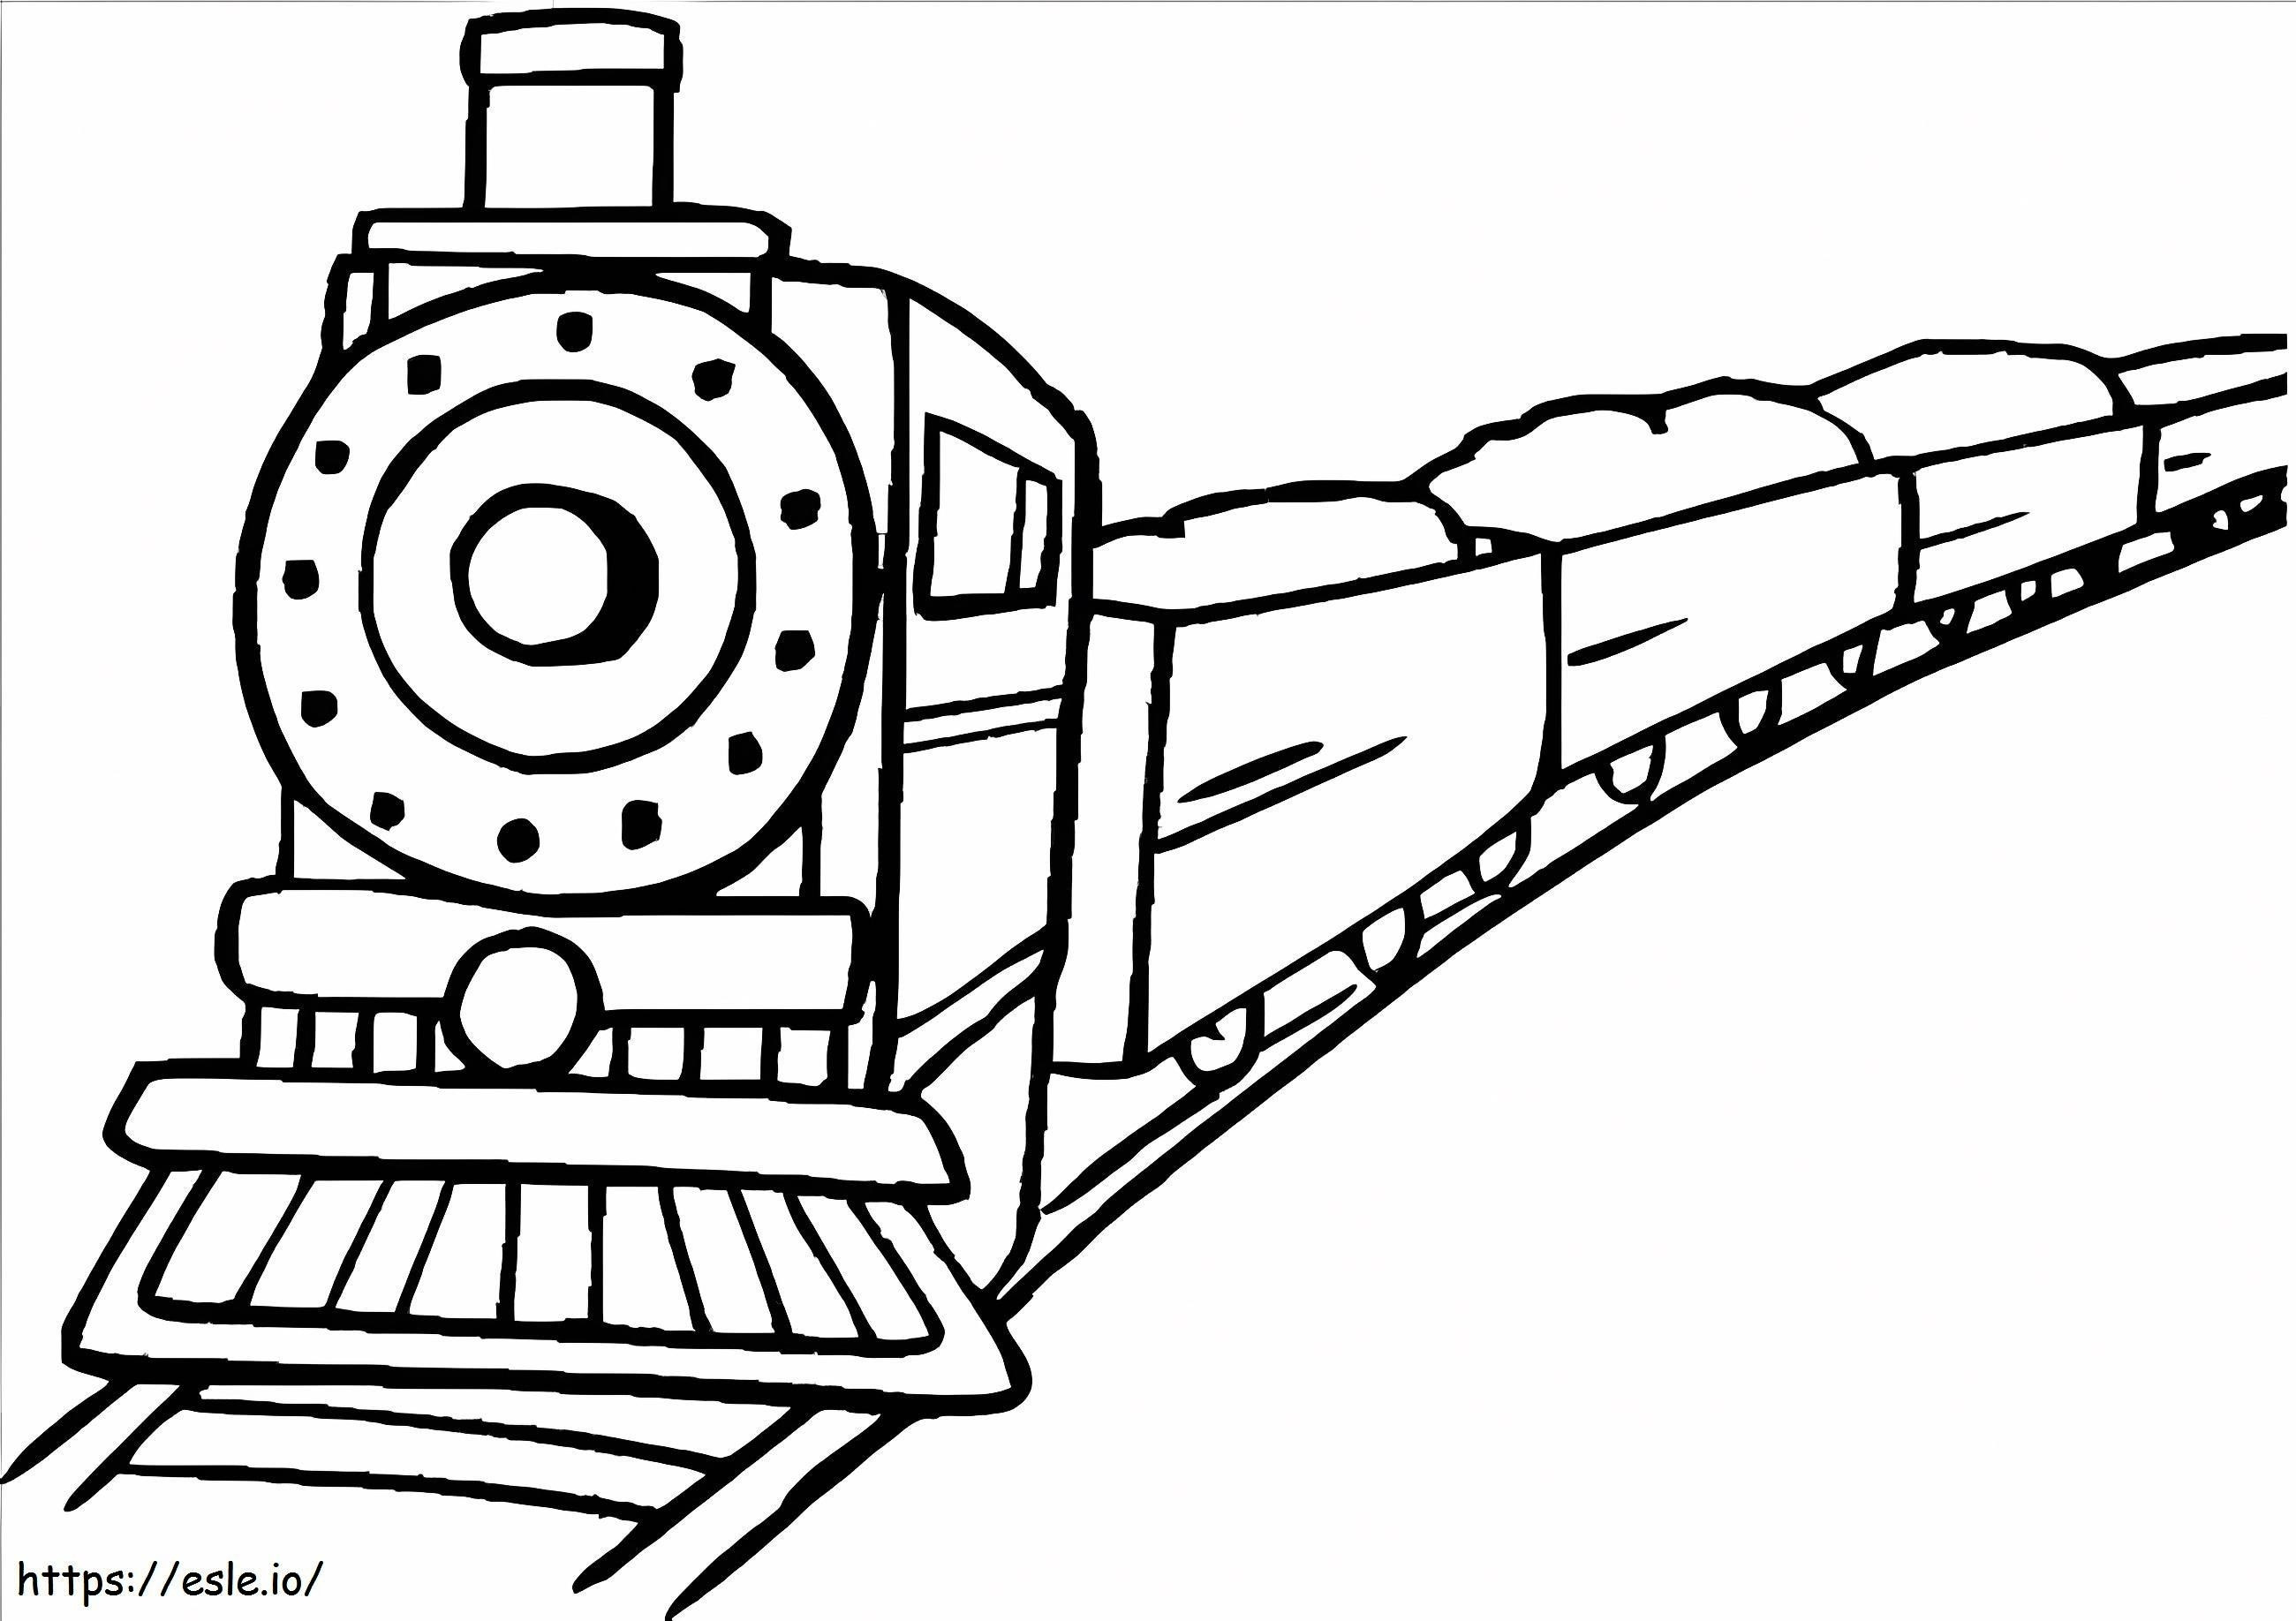 Train 4 coloring page